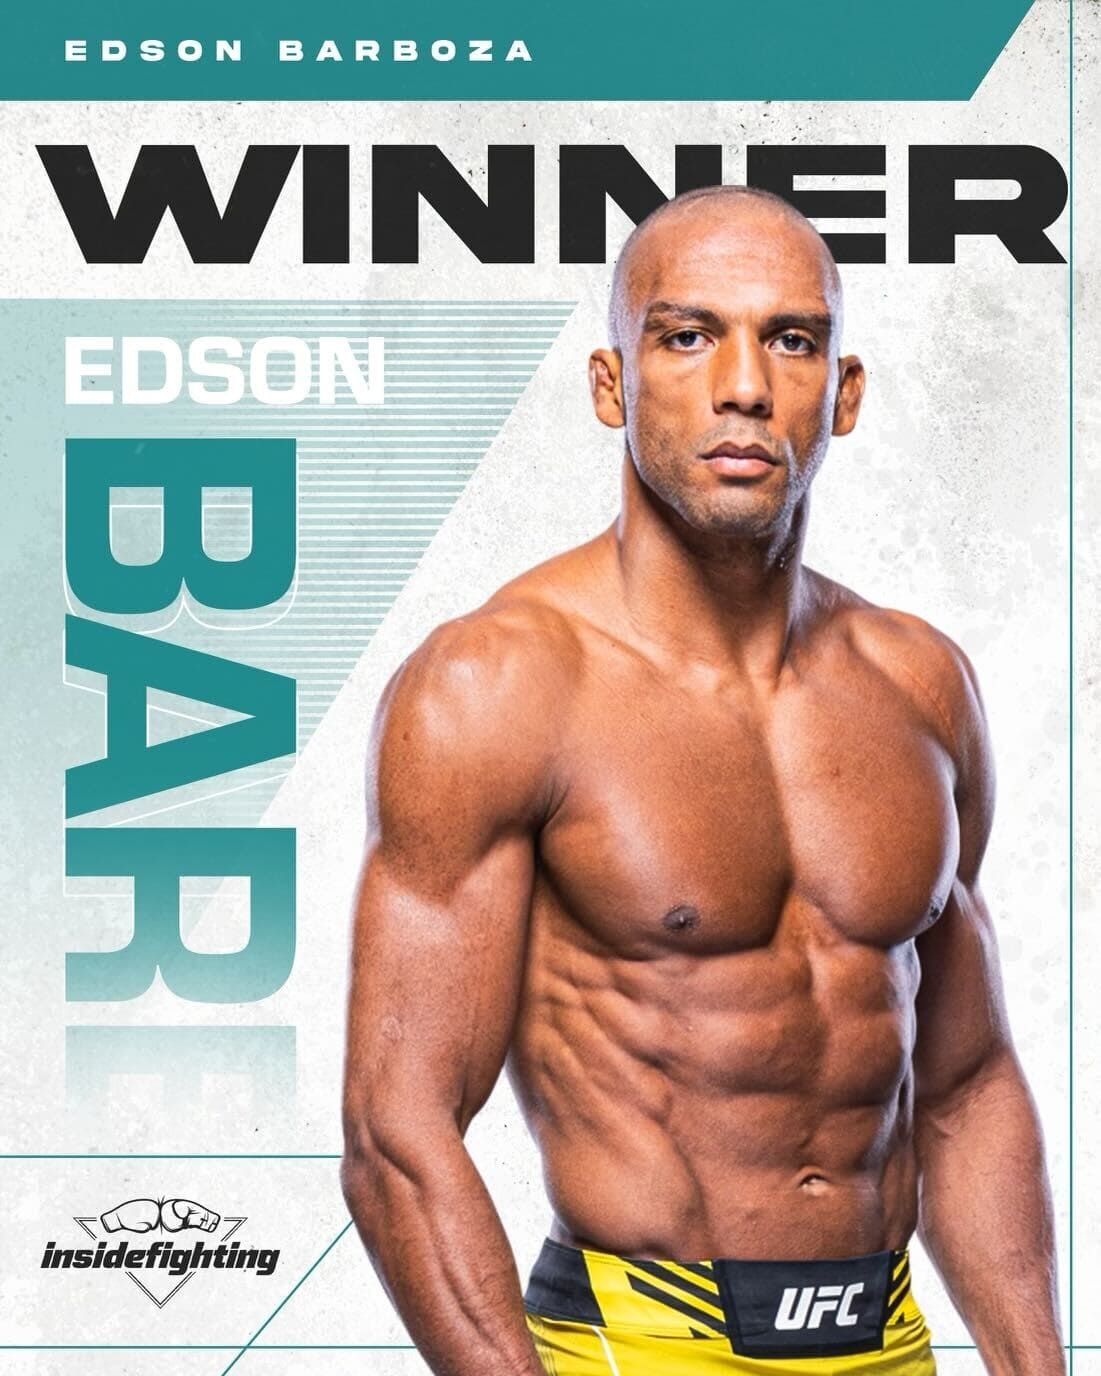 COMEBACK!!! Edson Barboza goes to war with Sodiq Yusuff, comes out victorious